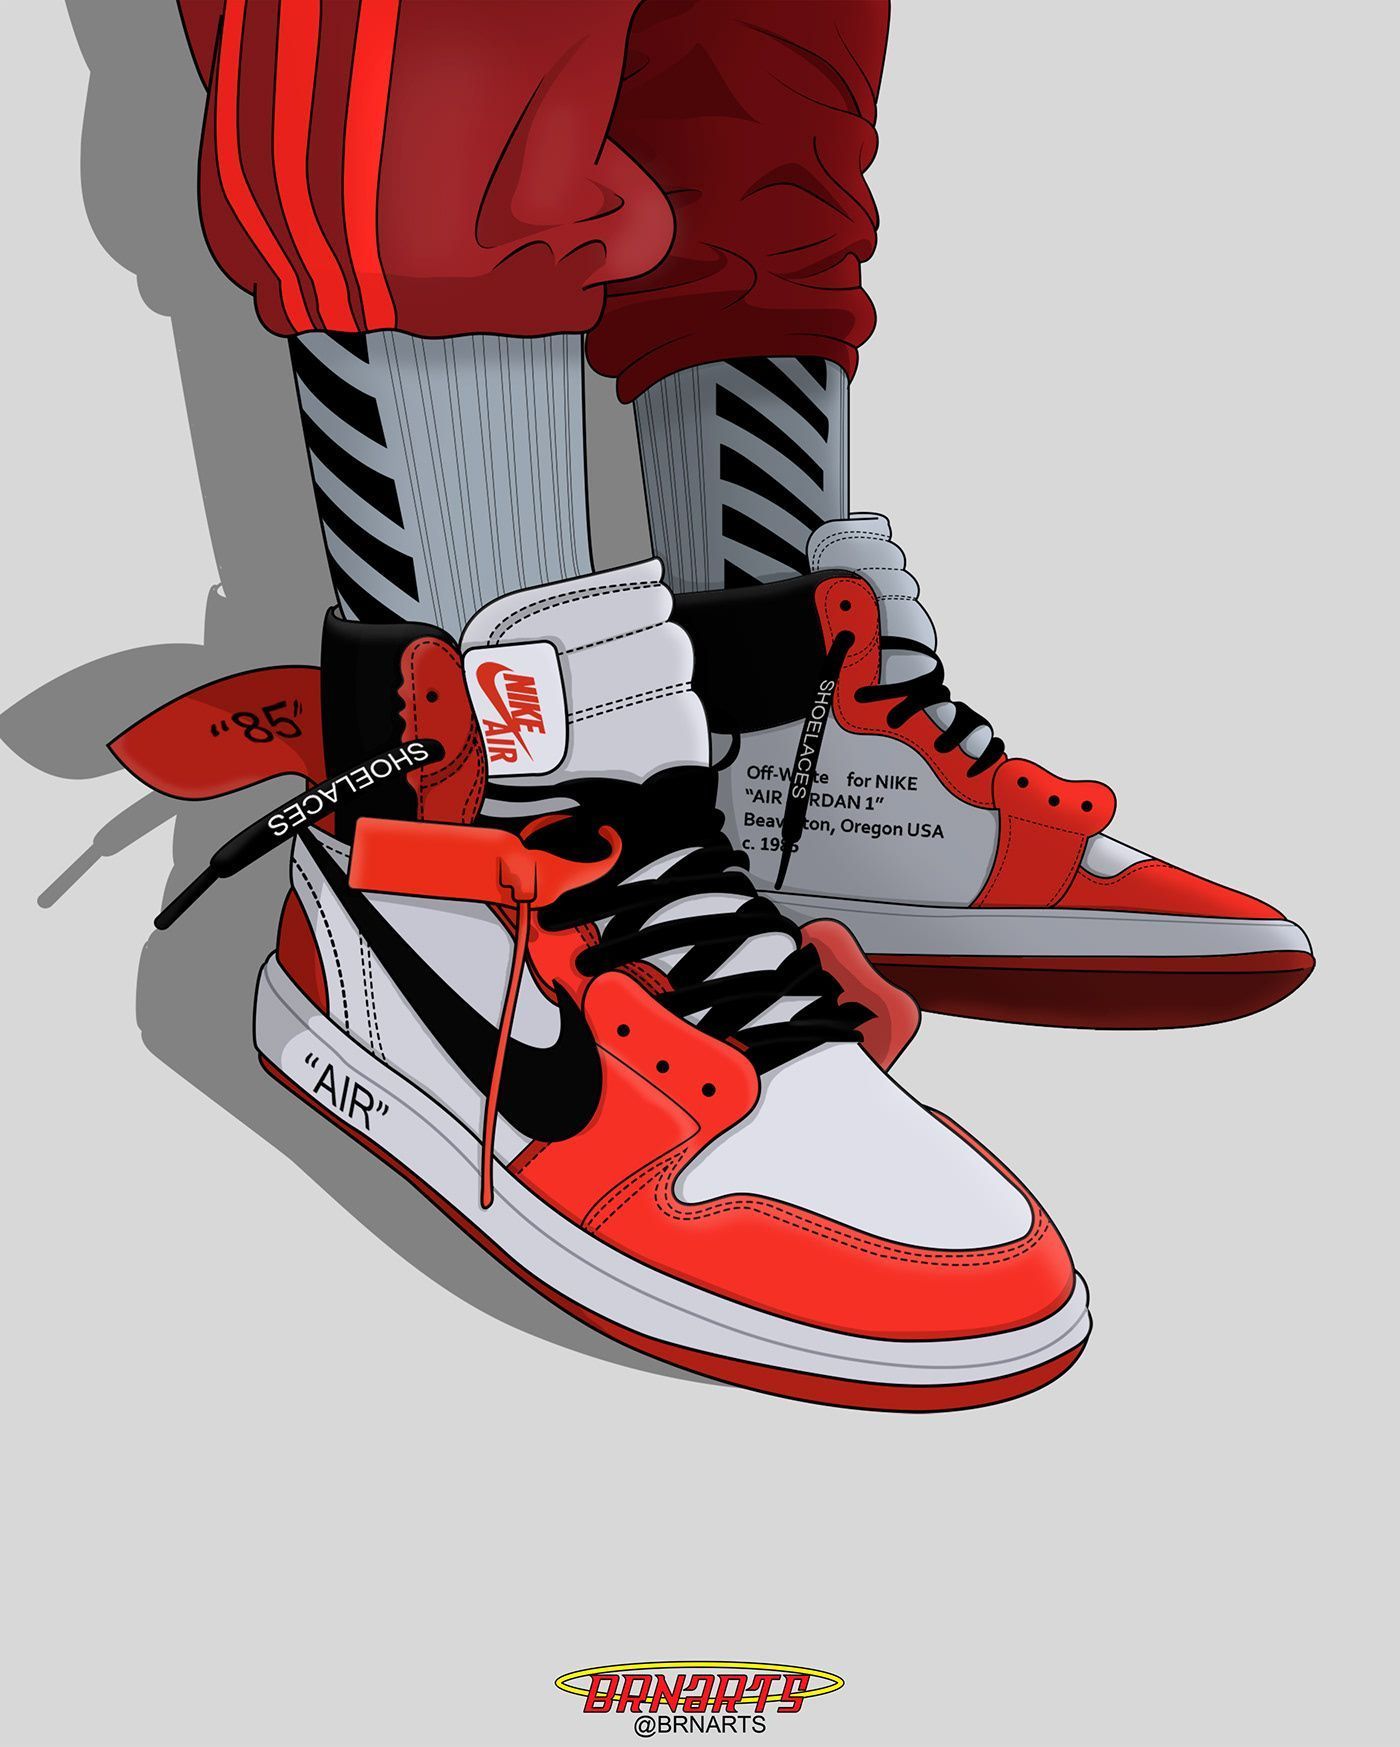 Hypebeast Shoes Wallpaper Free Hypebeast Shoes Background